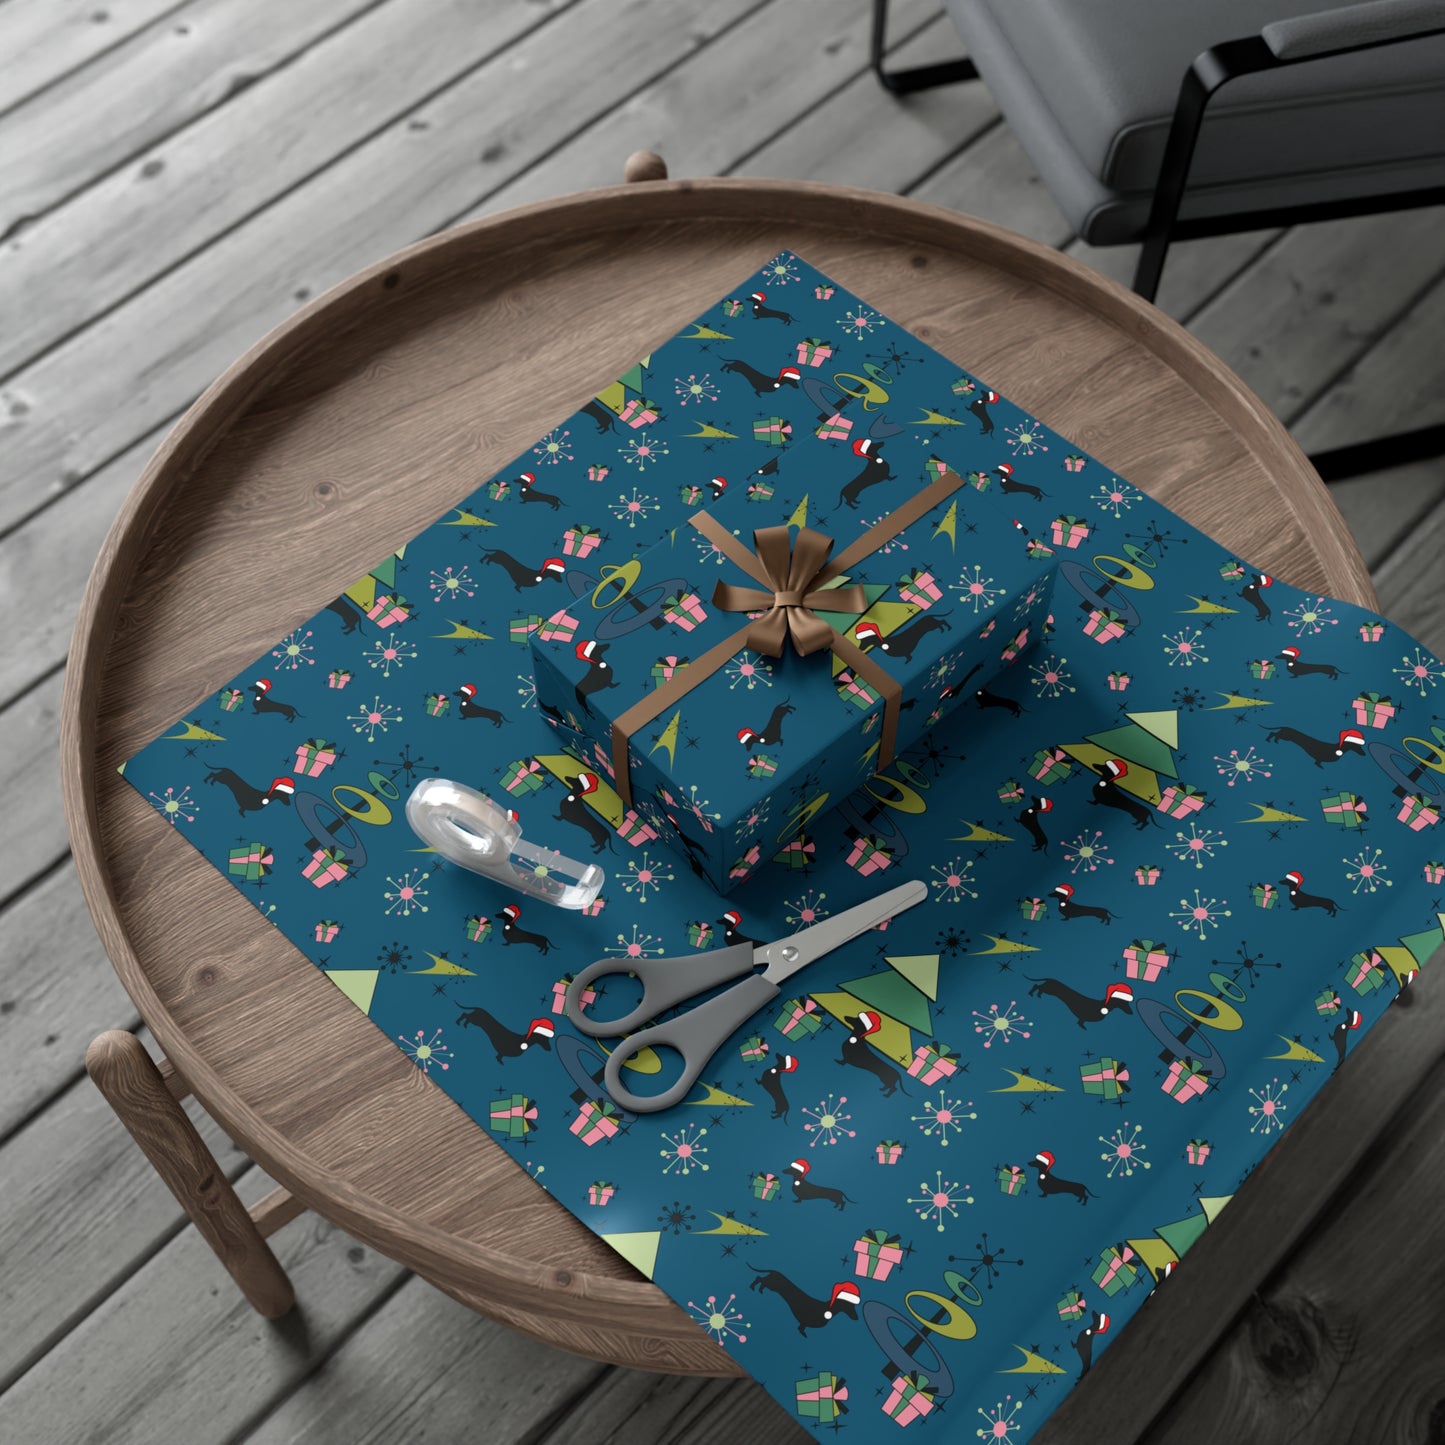 Retro 50s Atomic Dachshund Wiener Dog MCM Blue Eco-Friendly Wrapping Paper